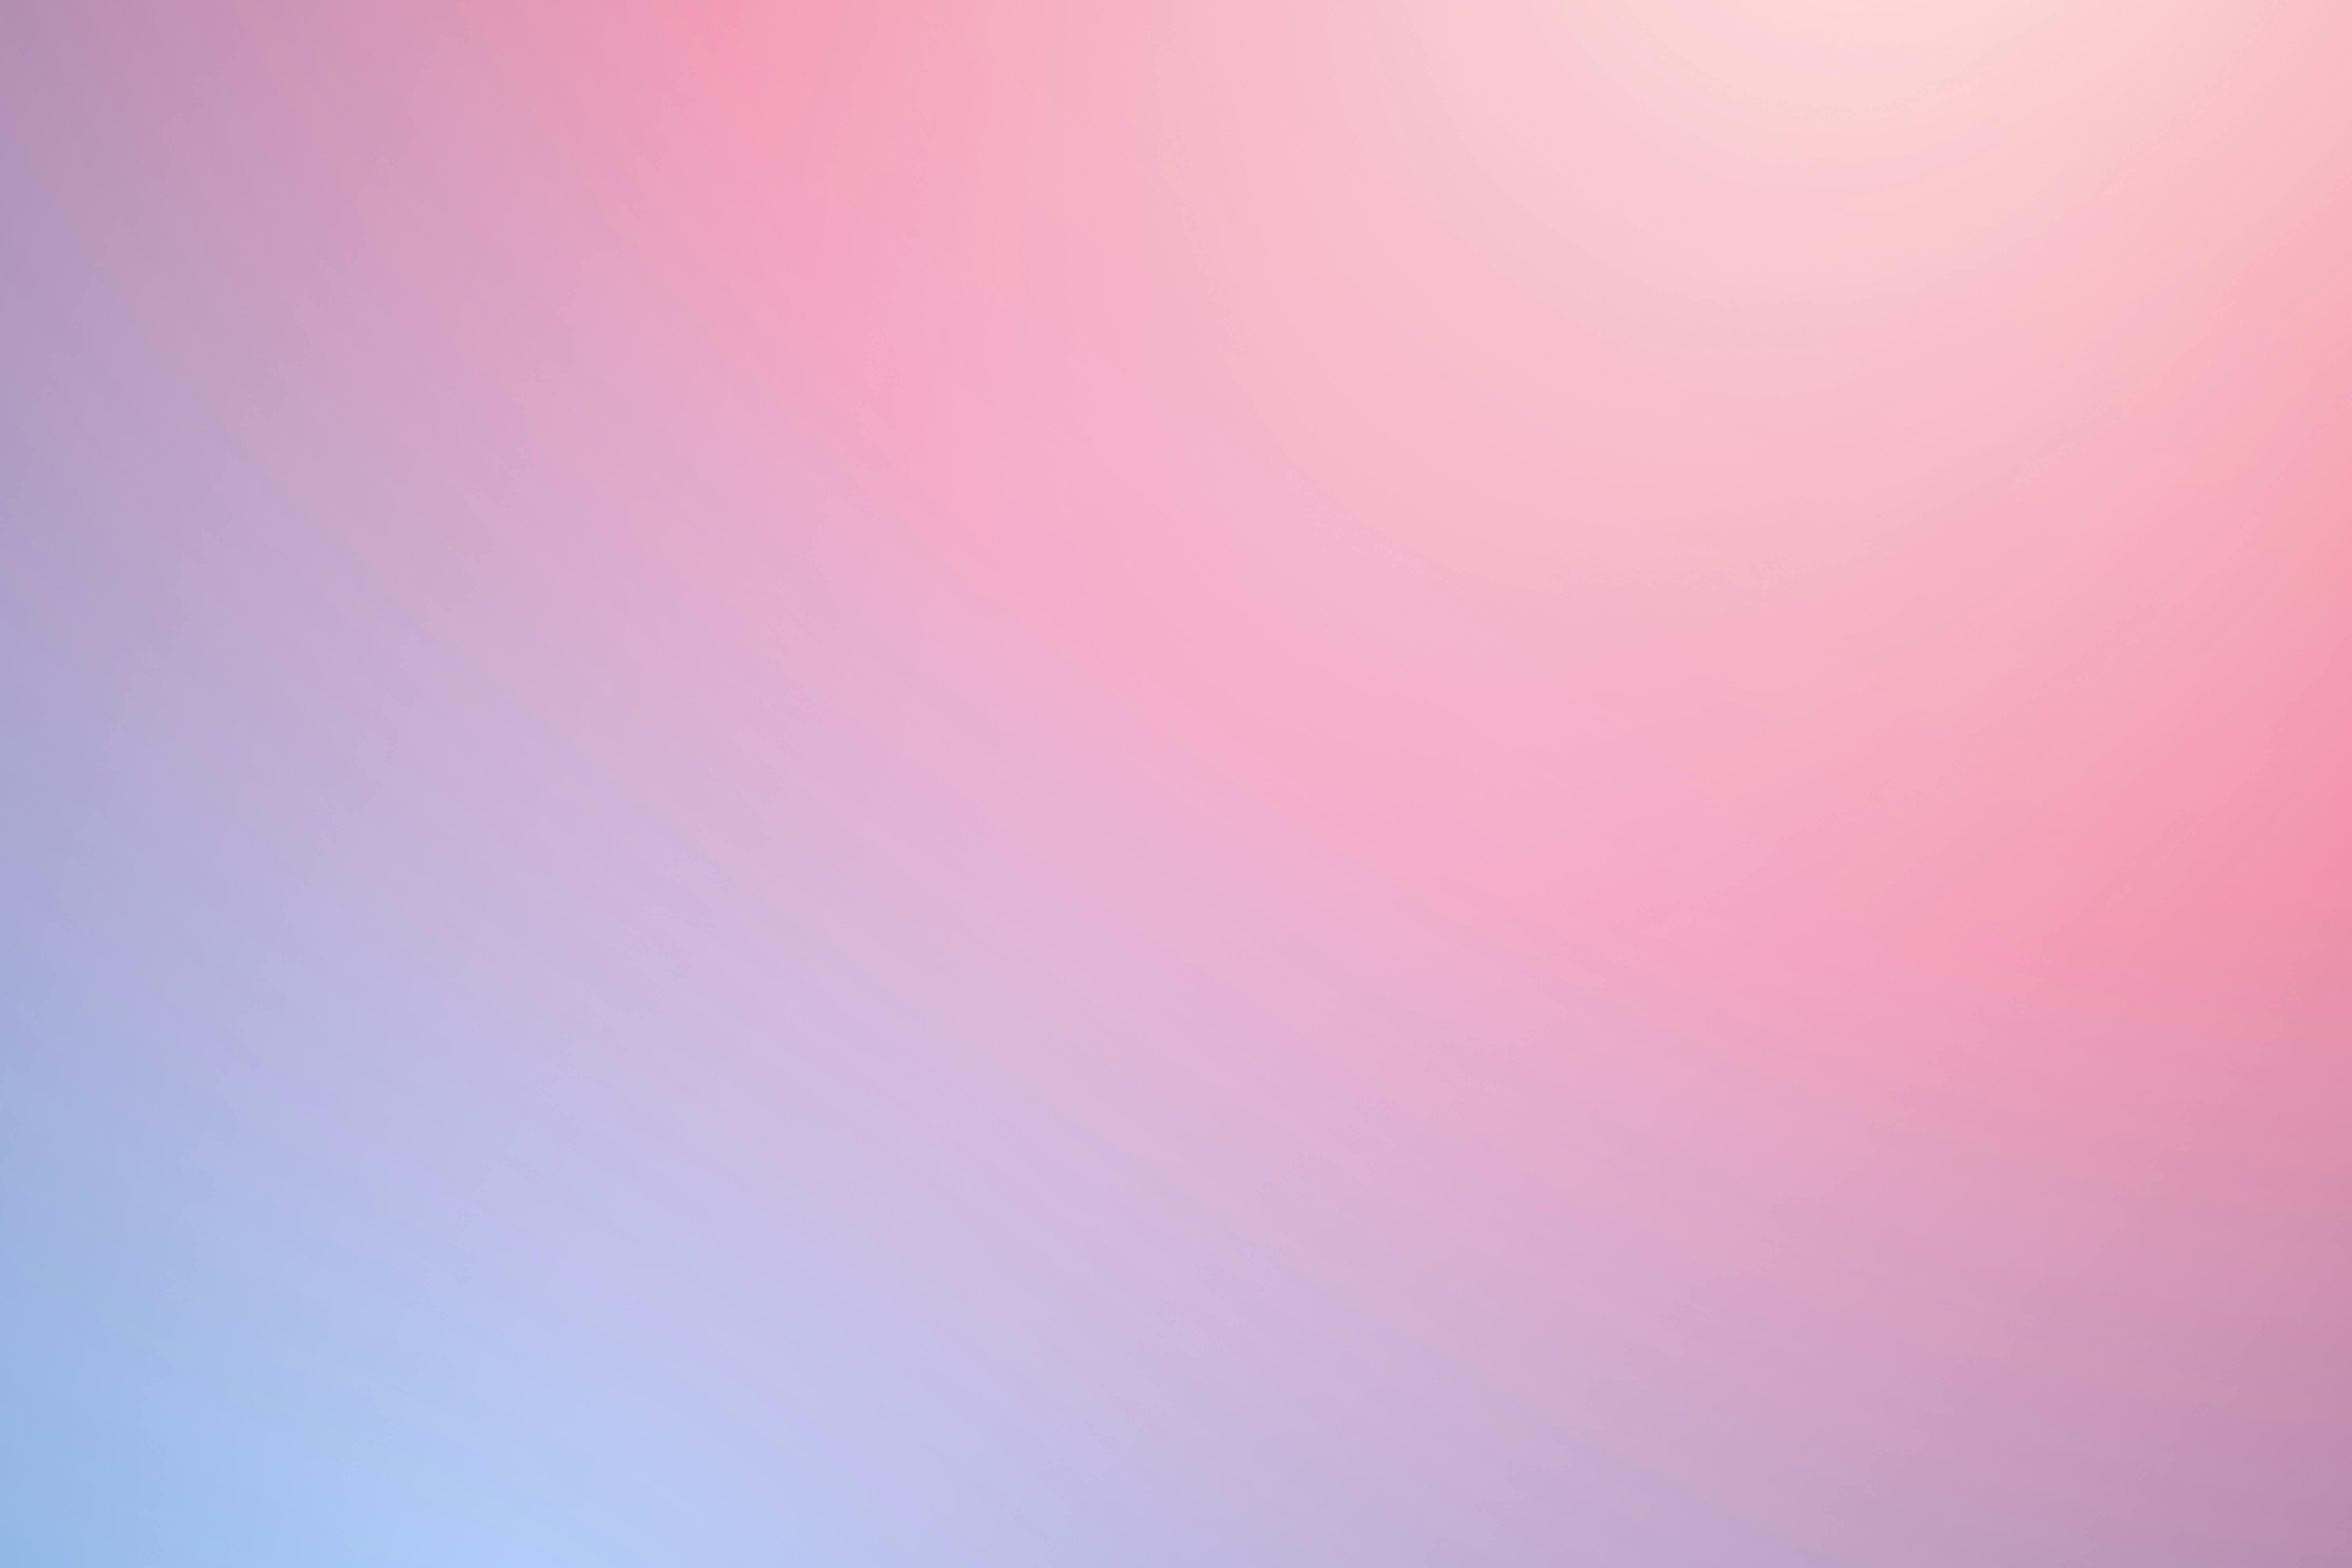 Gradient Photos Download The BEST Free Gradient Stock Photos  HD Images